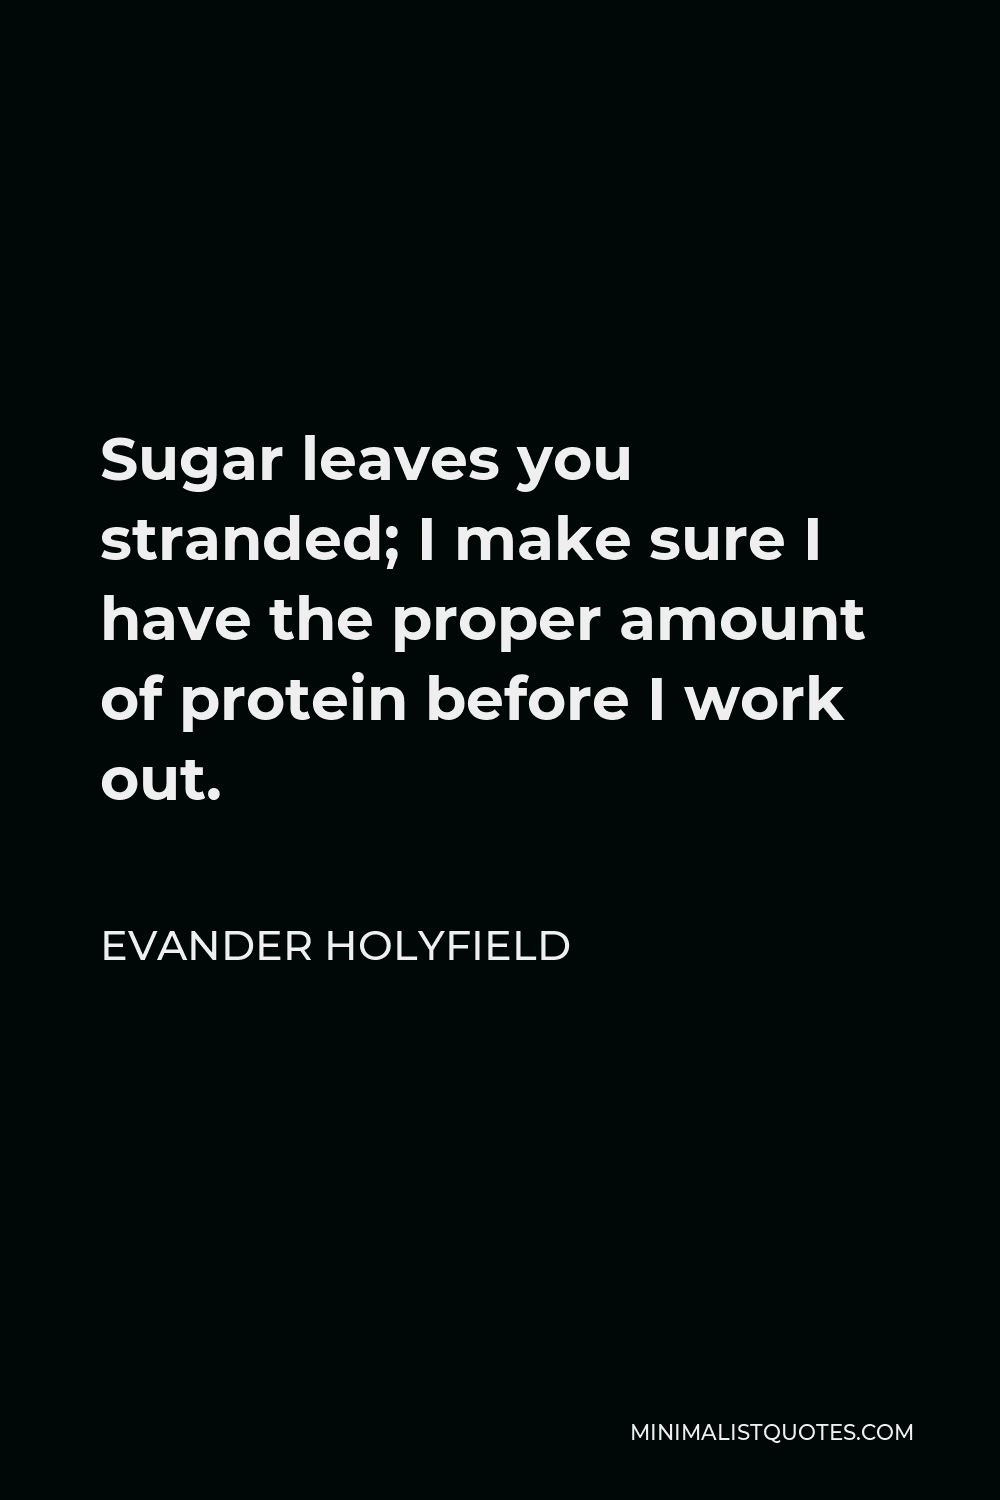 Evander Holyfield Quote - Sugar leaves you stranded; I make sure I have the proper amount of protein before I work out.